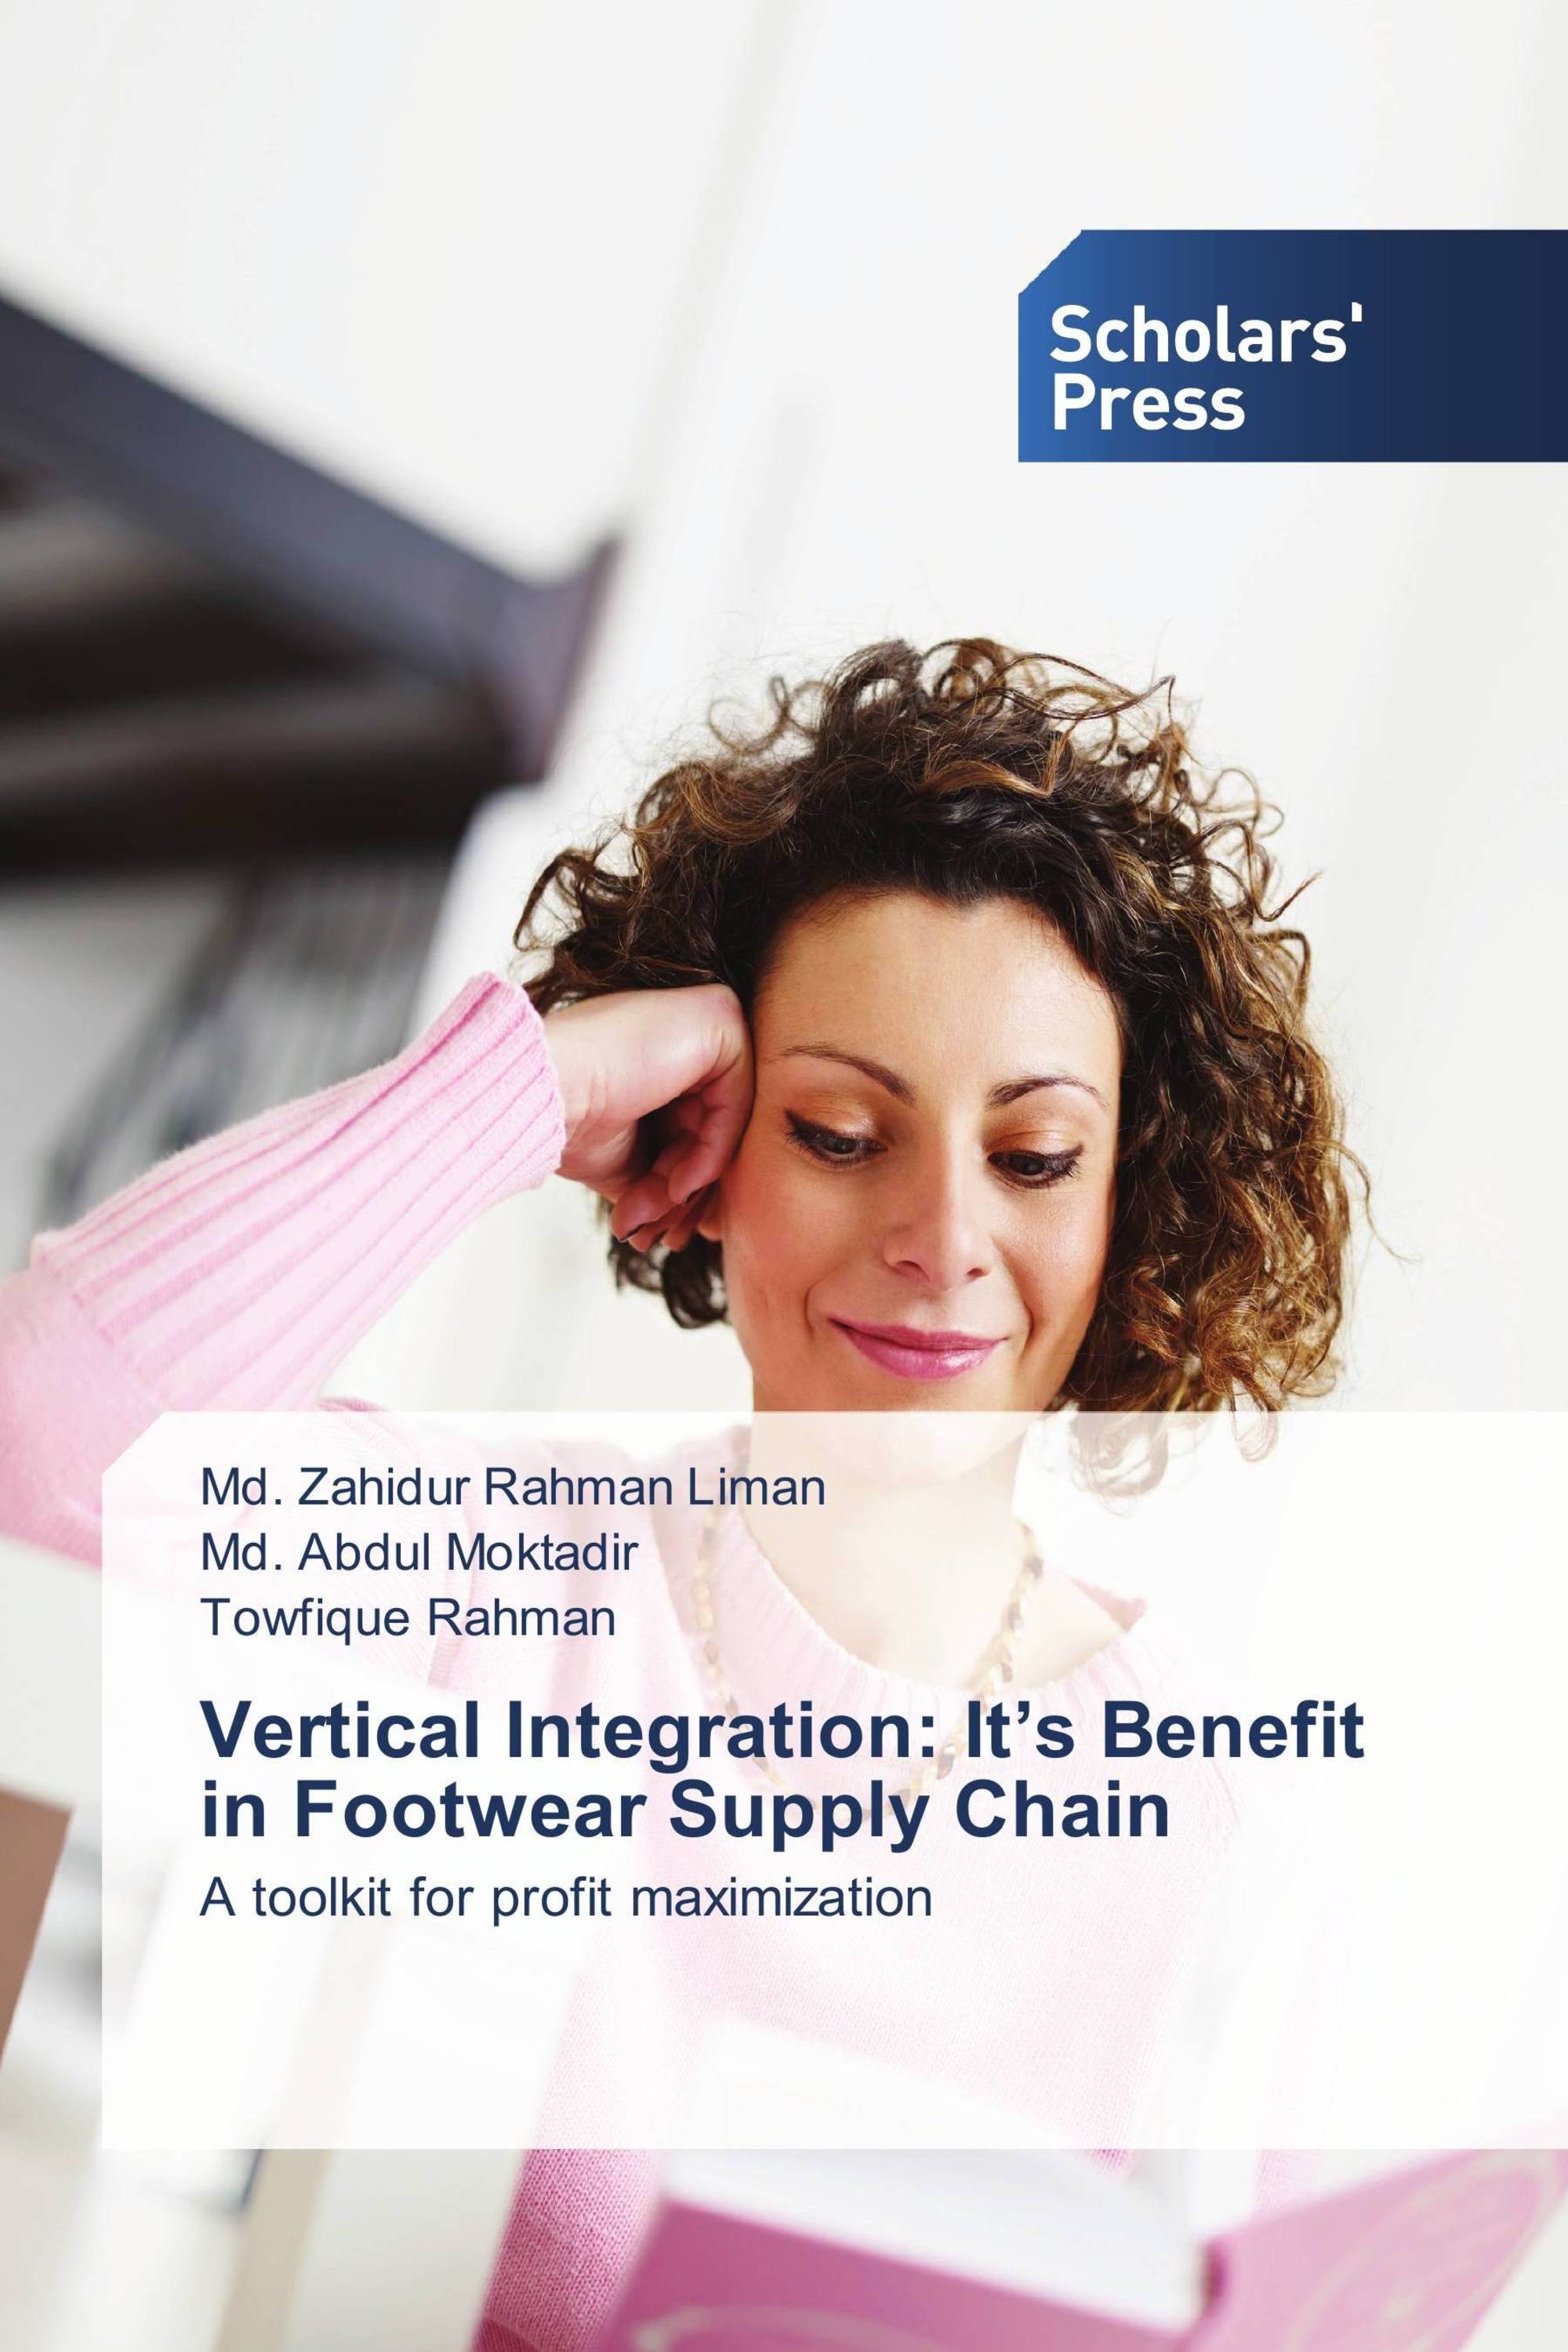 Vertical Integration: It’s Benefit in Footwear Supply Chain